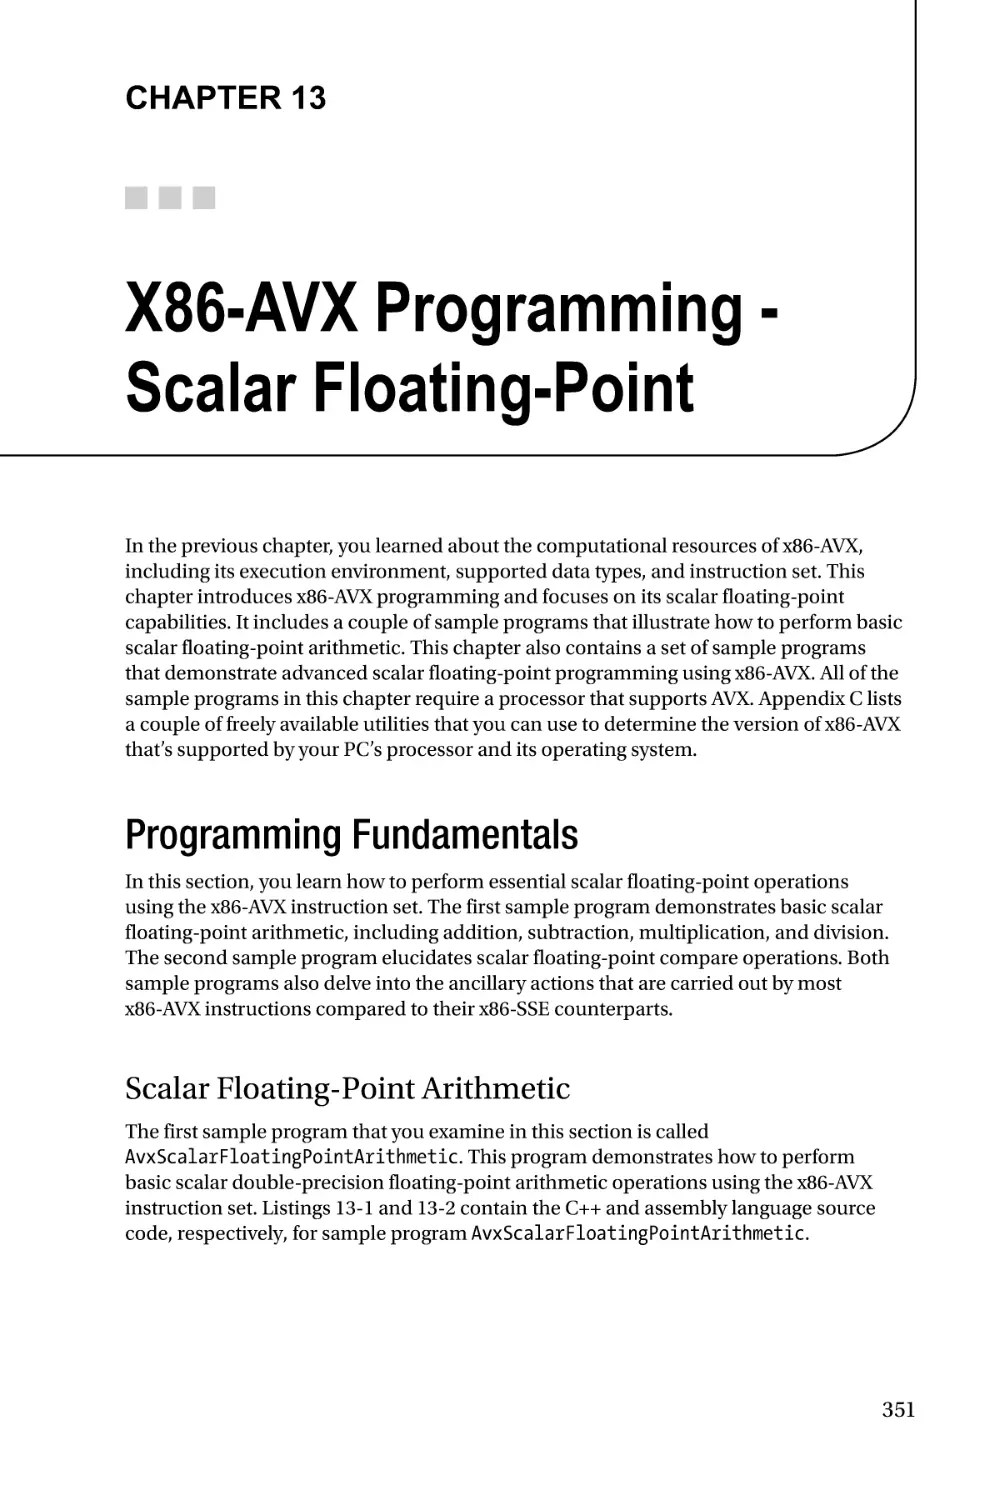 Chapter 13
Programming Fundamentals
Scalar Floating-Point Arithmetic